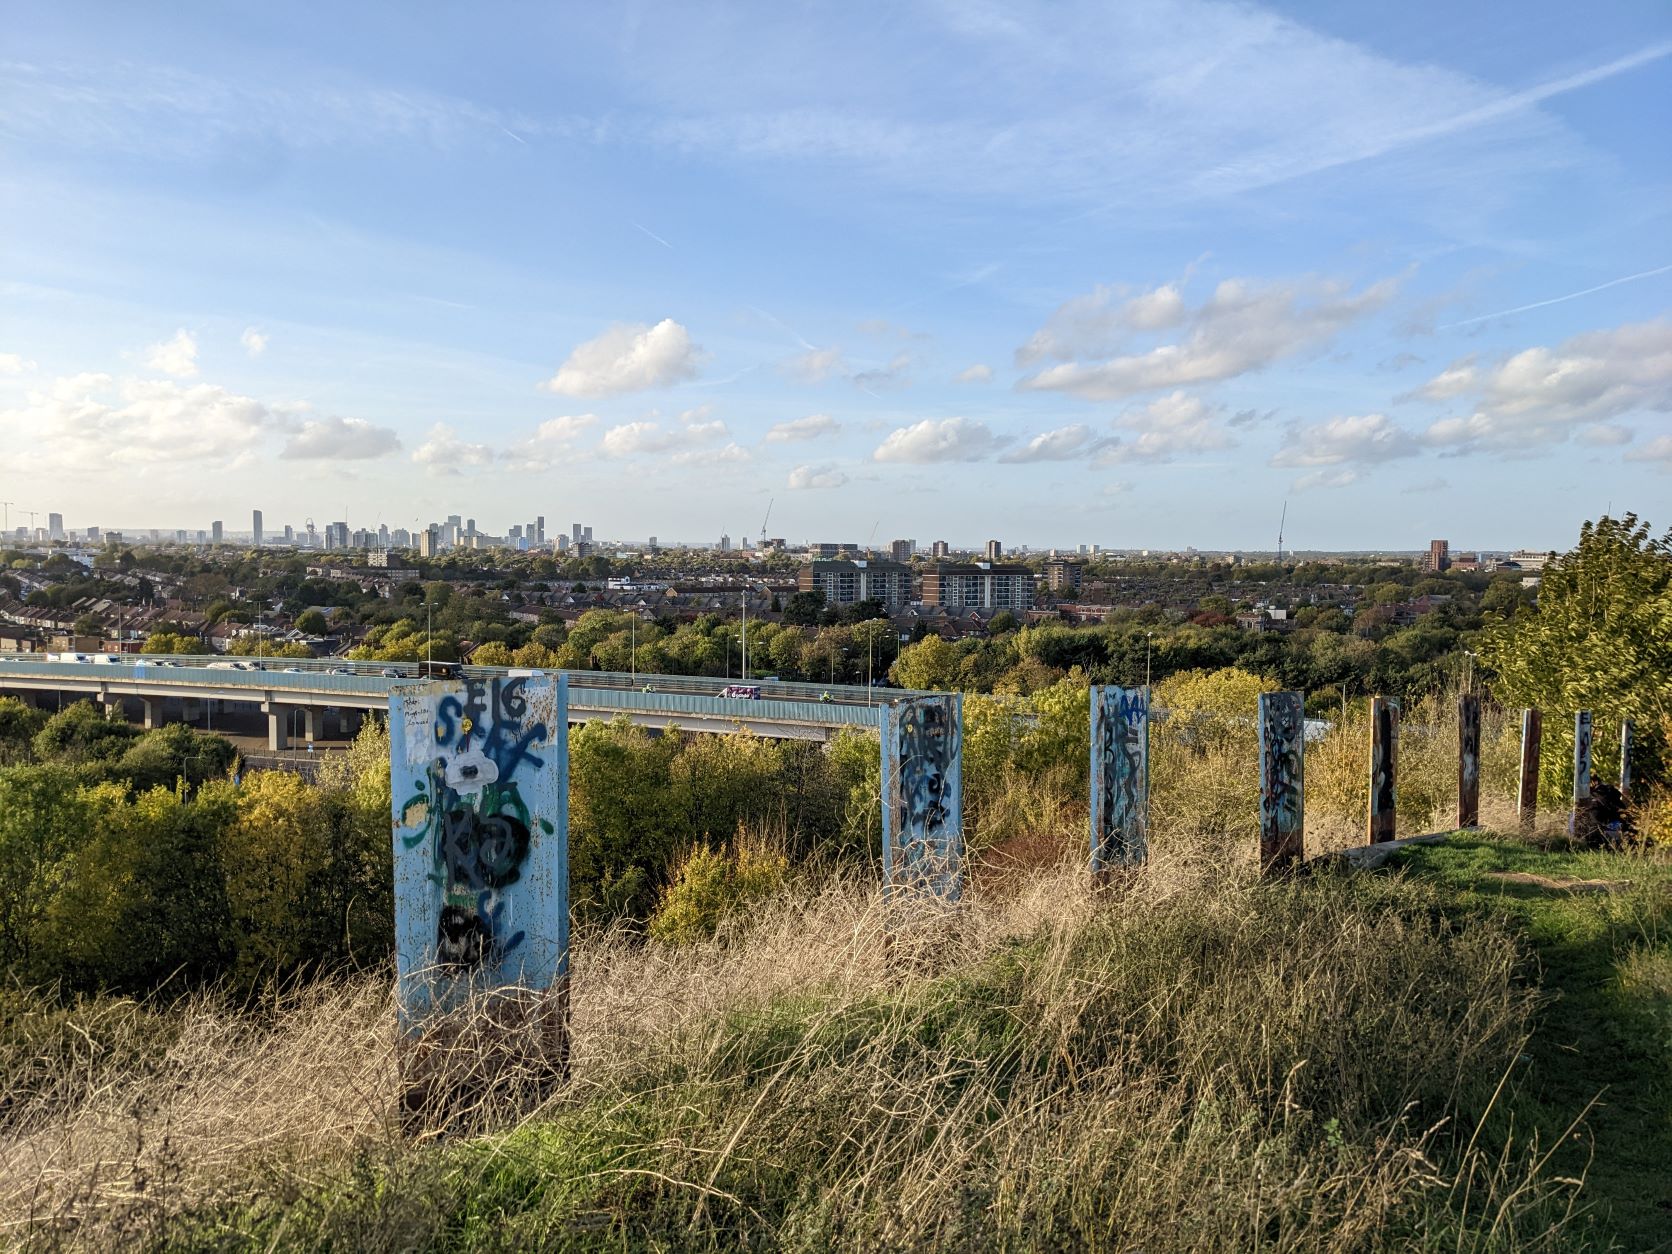 View from the top of the Beckton Alp towards Stratford, East London. The view takes in nine graffitied sheet piles standing in a row around 1m high emerging from the summit covered in long grass. The A13 motorway can be seen with the distant towers of Stratford on the horizon against a blue sky and evening light.